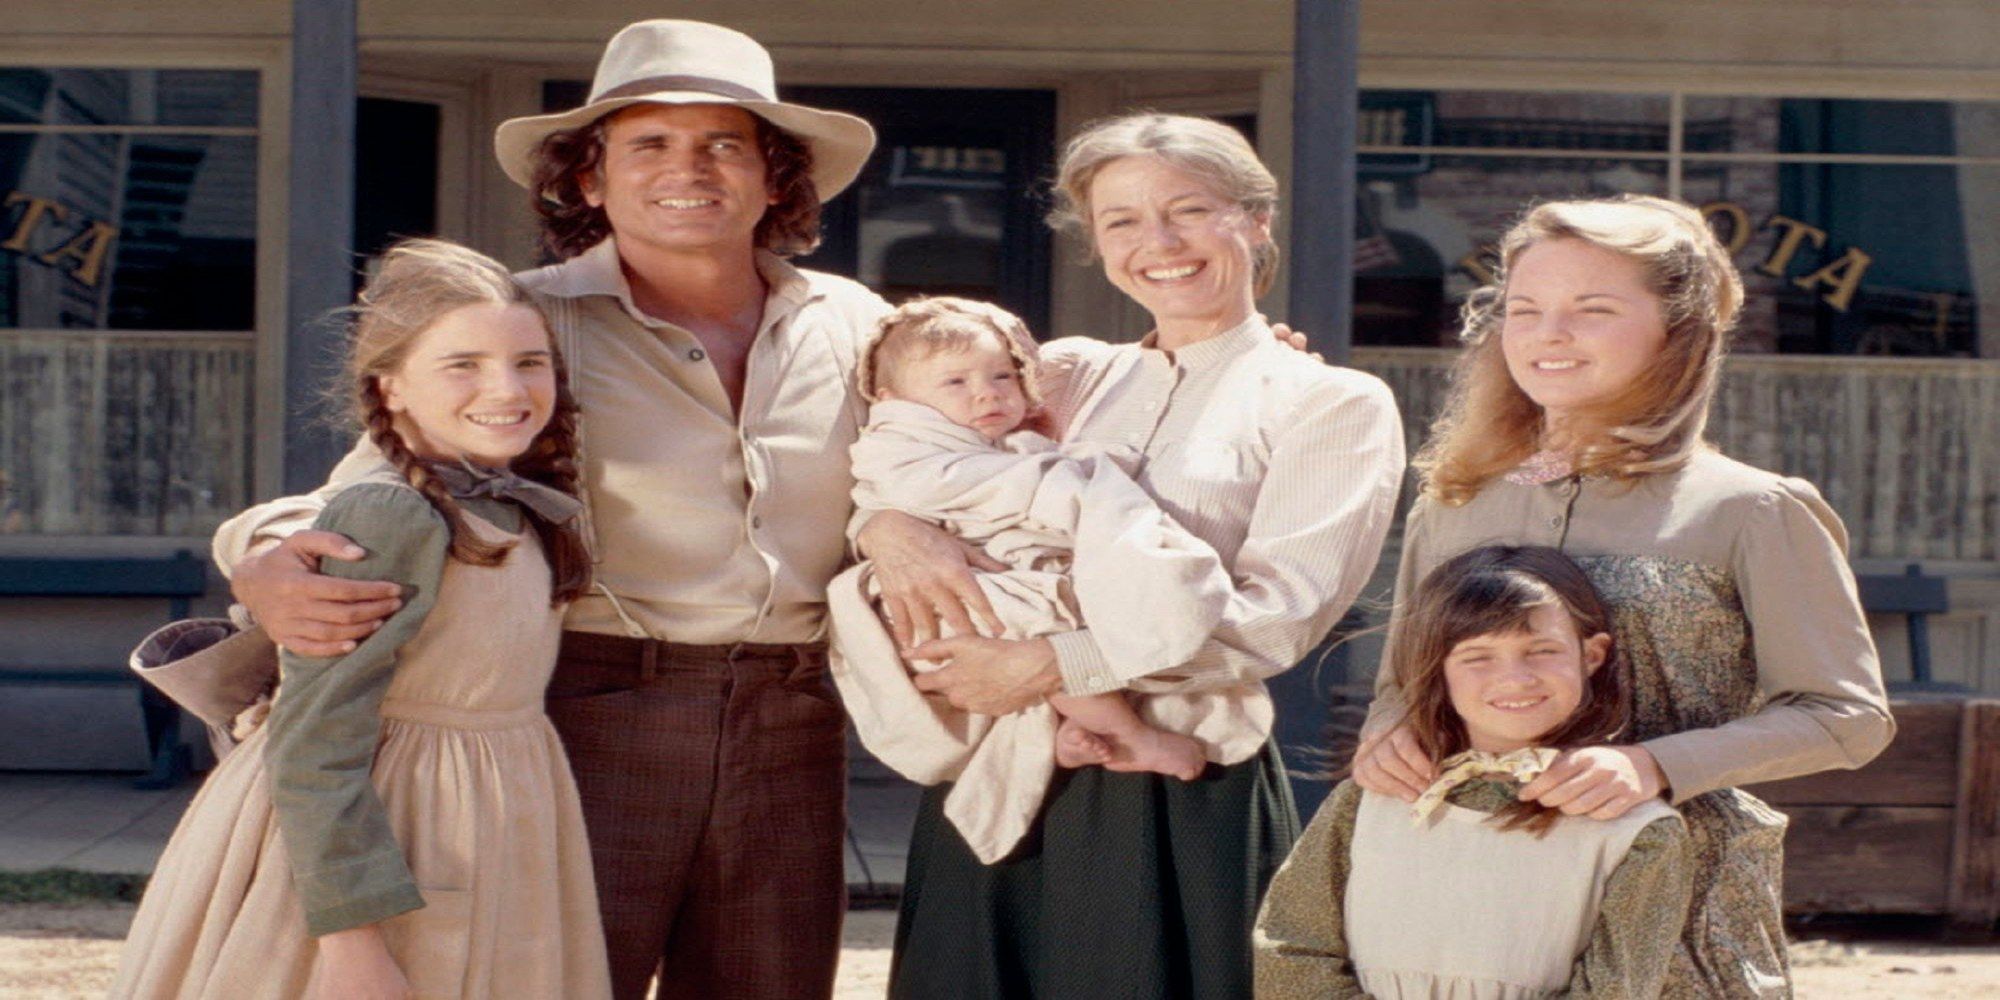 Little House On The Prairie: 10 Life Lessons Learned From Watching The Show